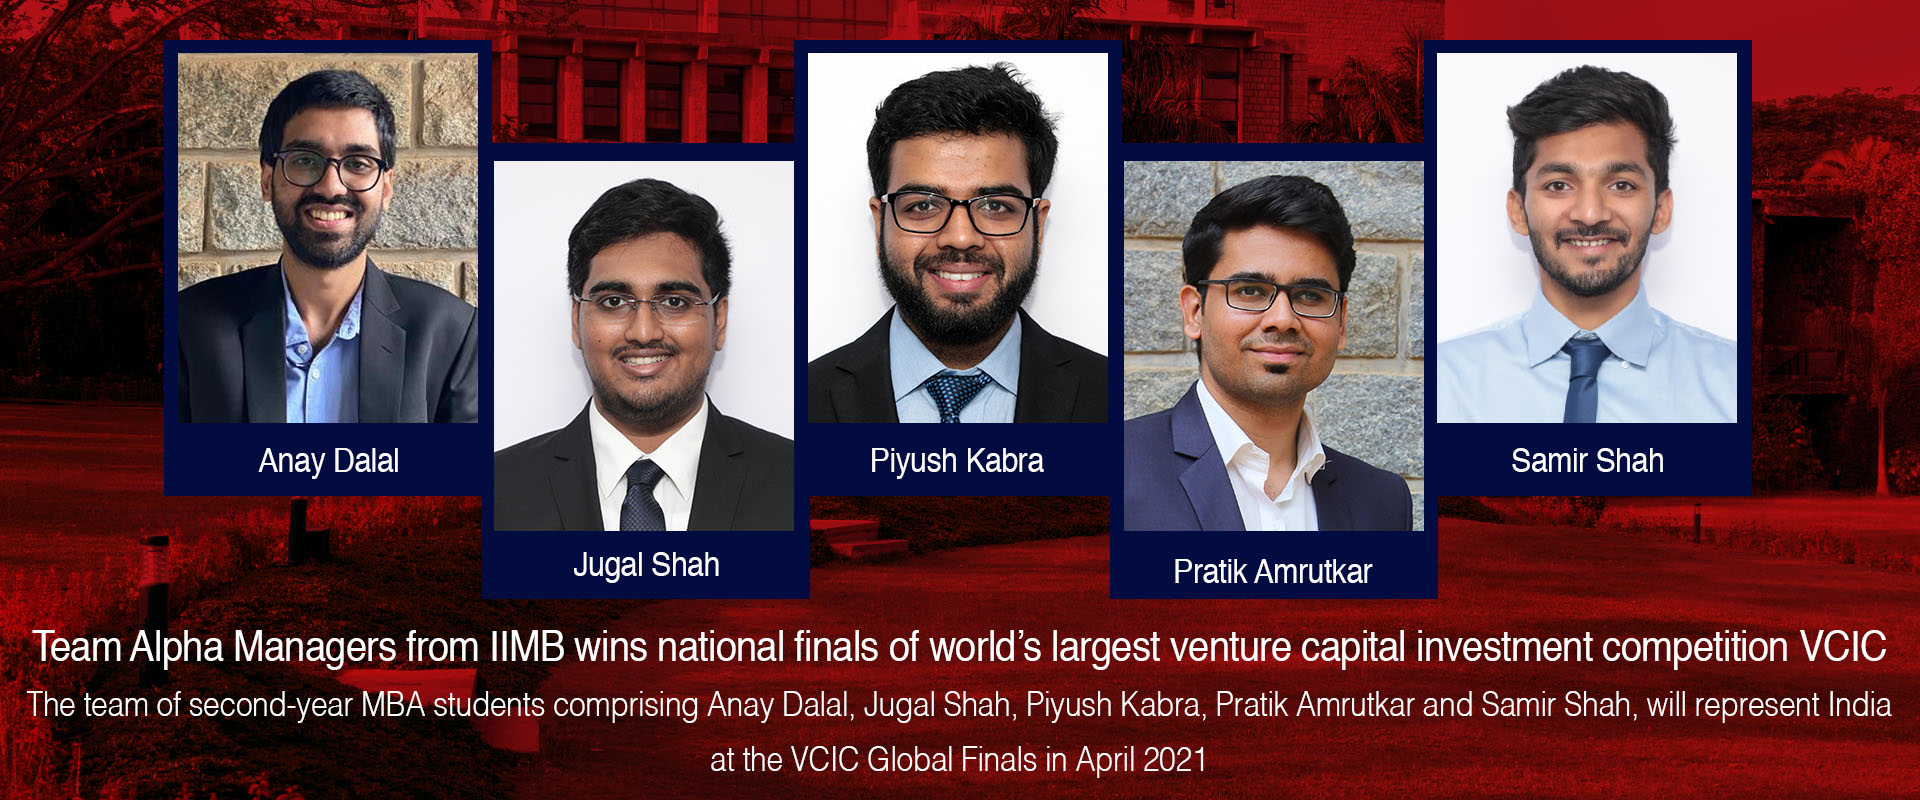 Team Alpha Managers from IIMB wins national finals of world’s largest venture capital investment competition VCIC